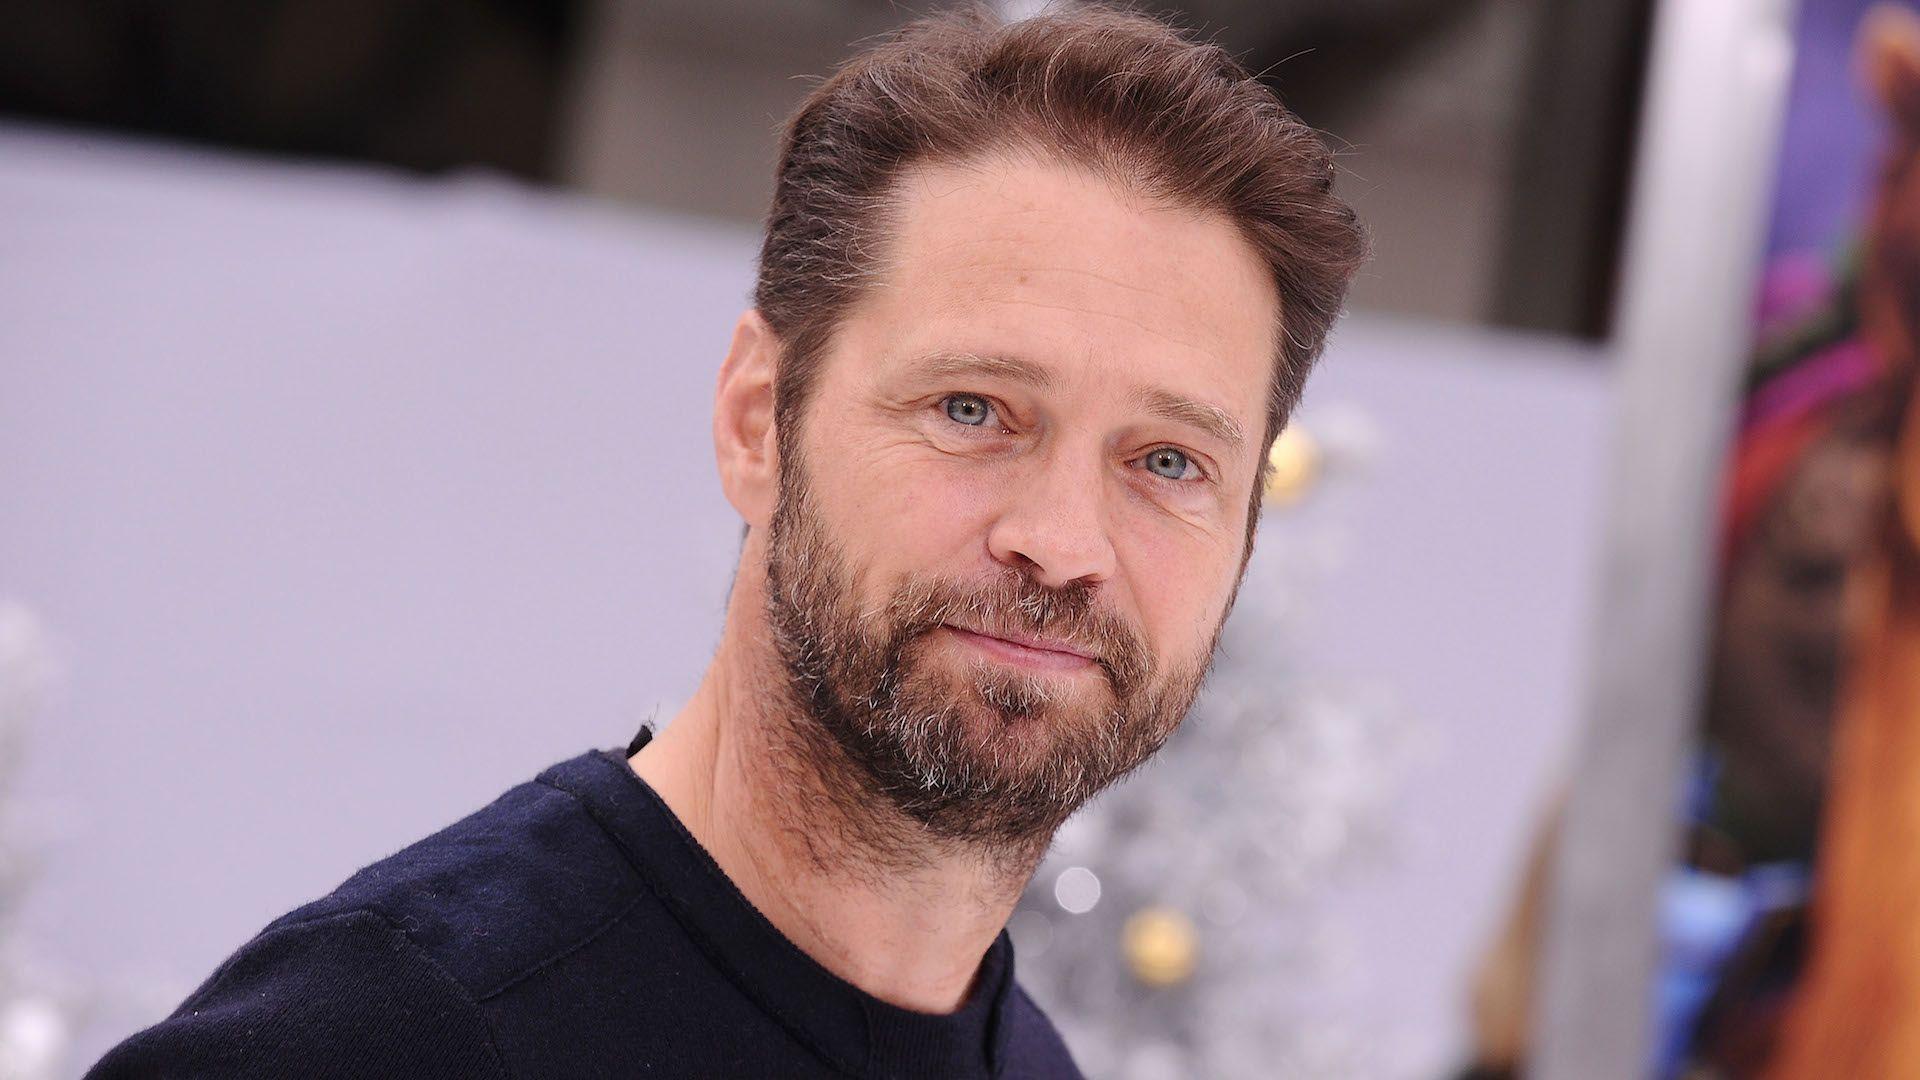 That Time Jason Priestly Punched Harvey Weinstein in the Face